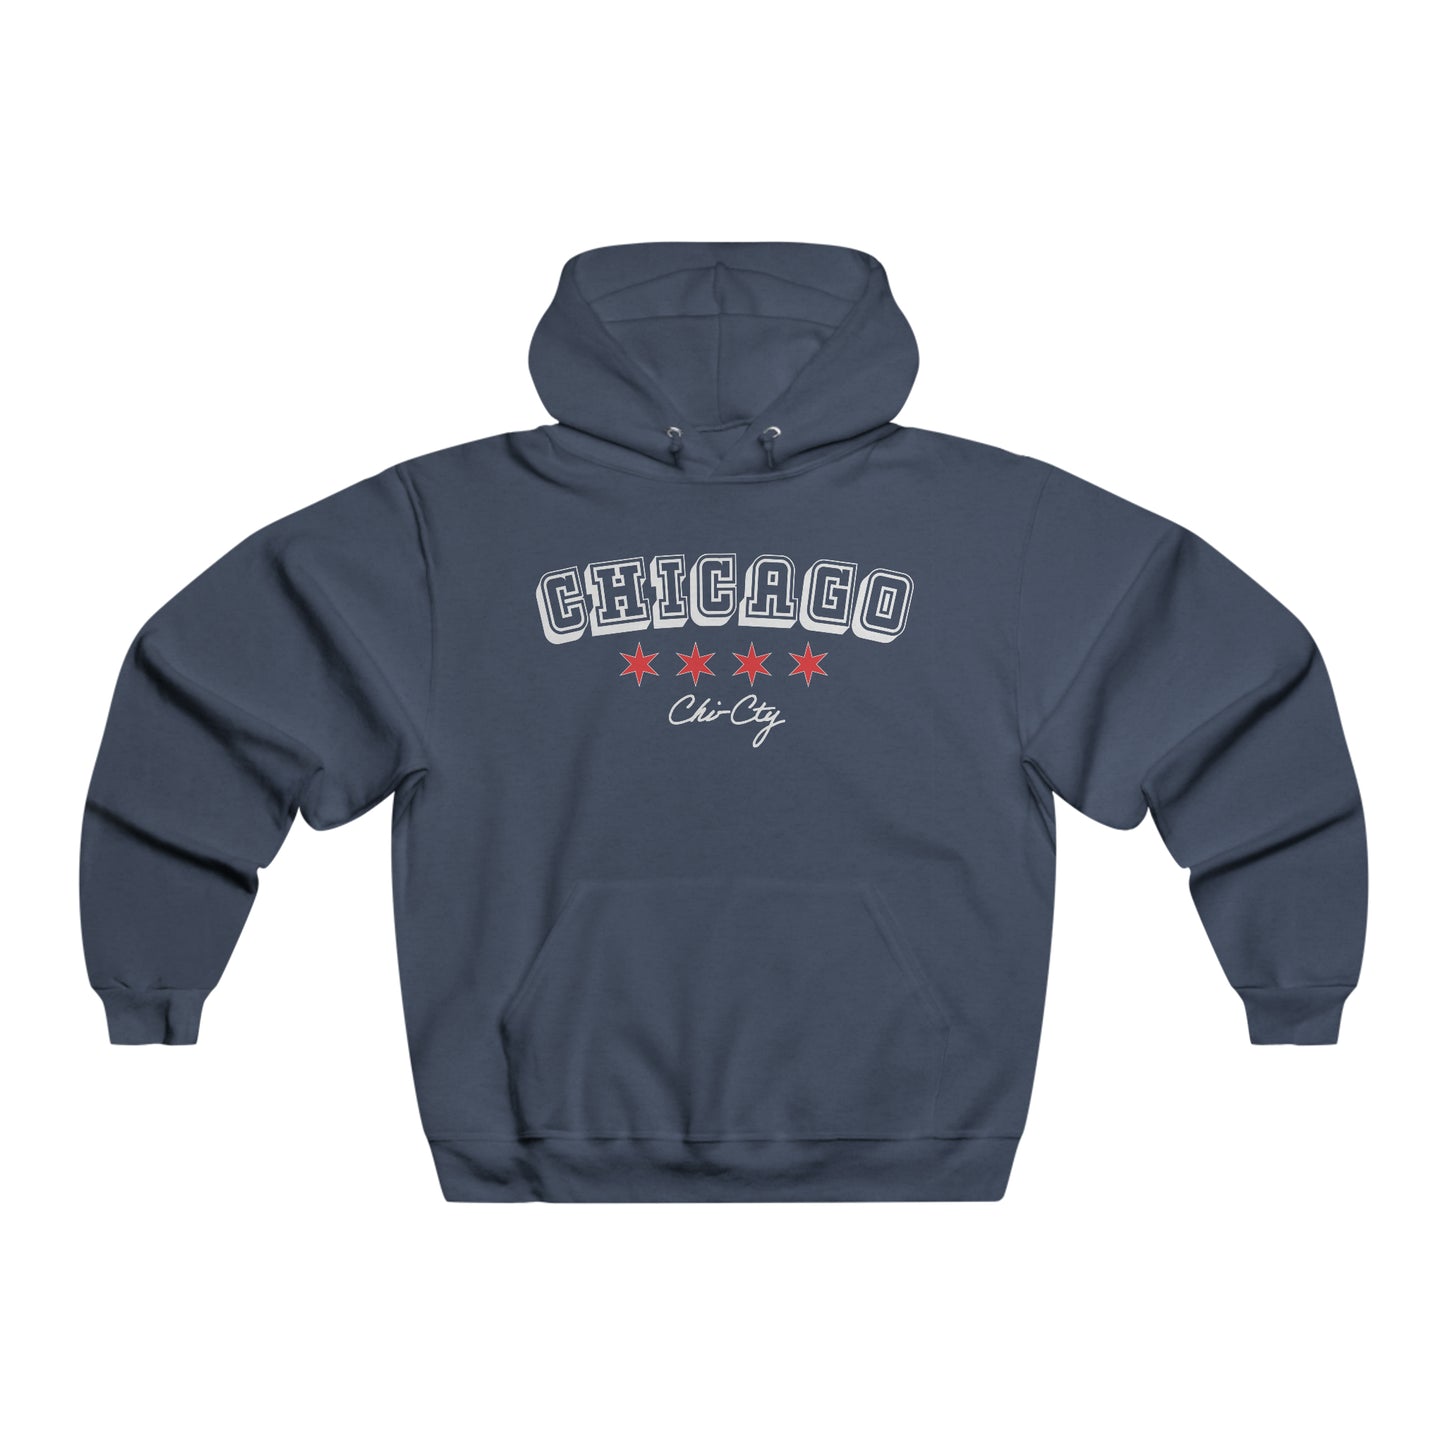 CHI-CTY - Chicago Print Hoodie